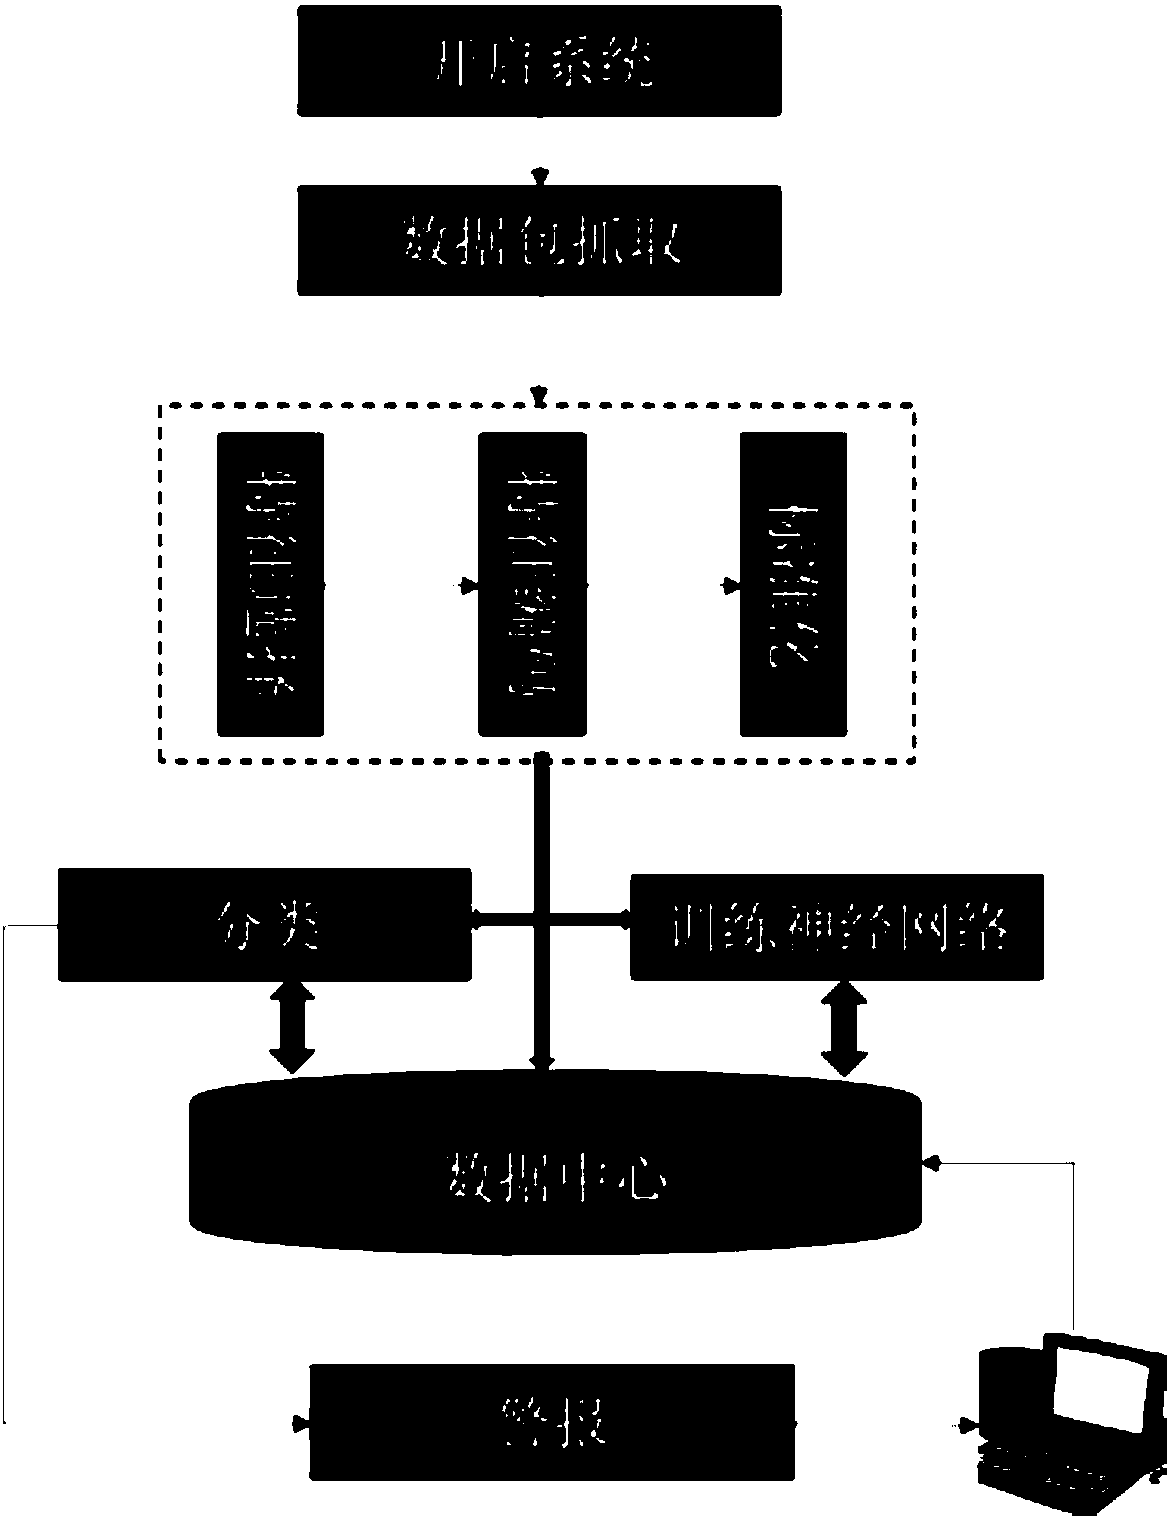 Neural network-based intrusion detection method